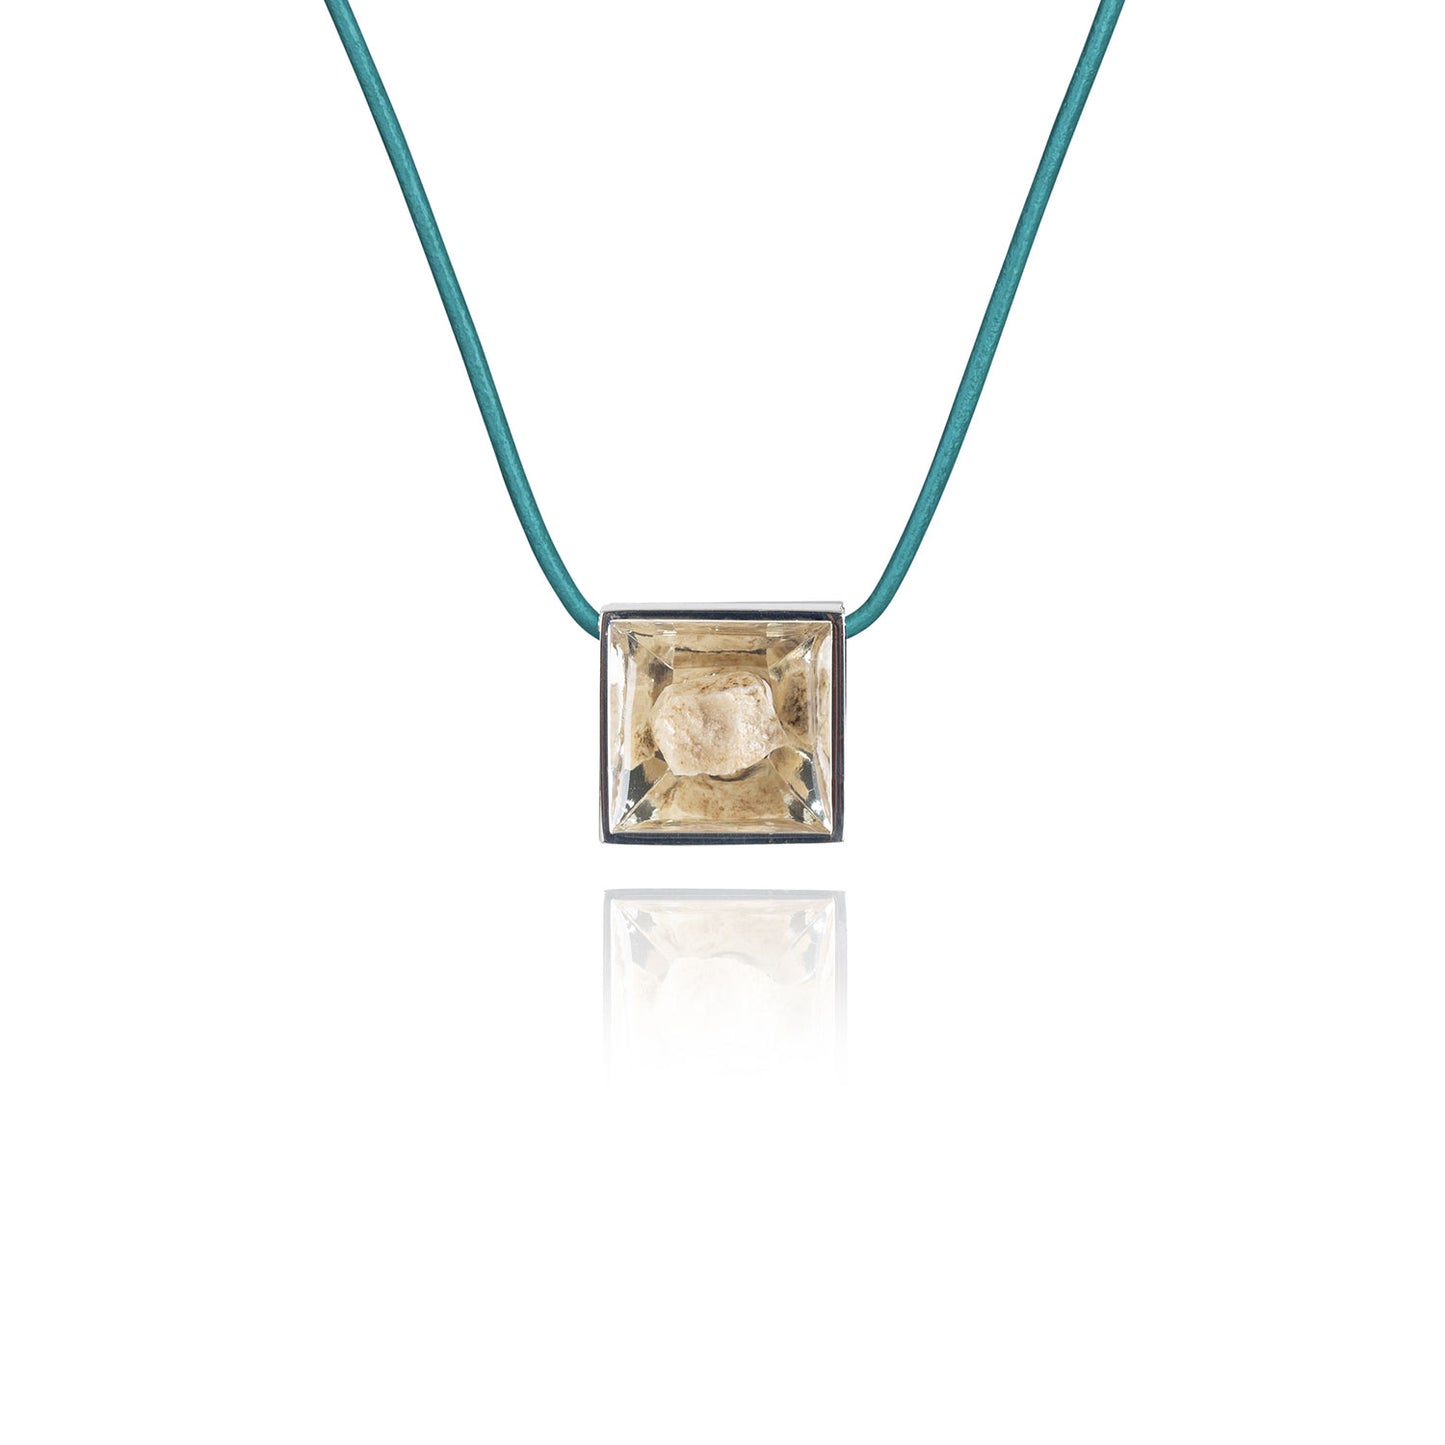 A small natural tan stone sitting in the middle of a square shaped metal pendant in a silver color. The pendant is hanging on a turquoise leather necklace.